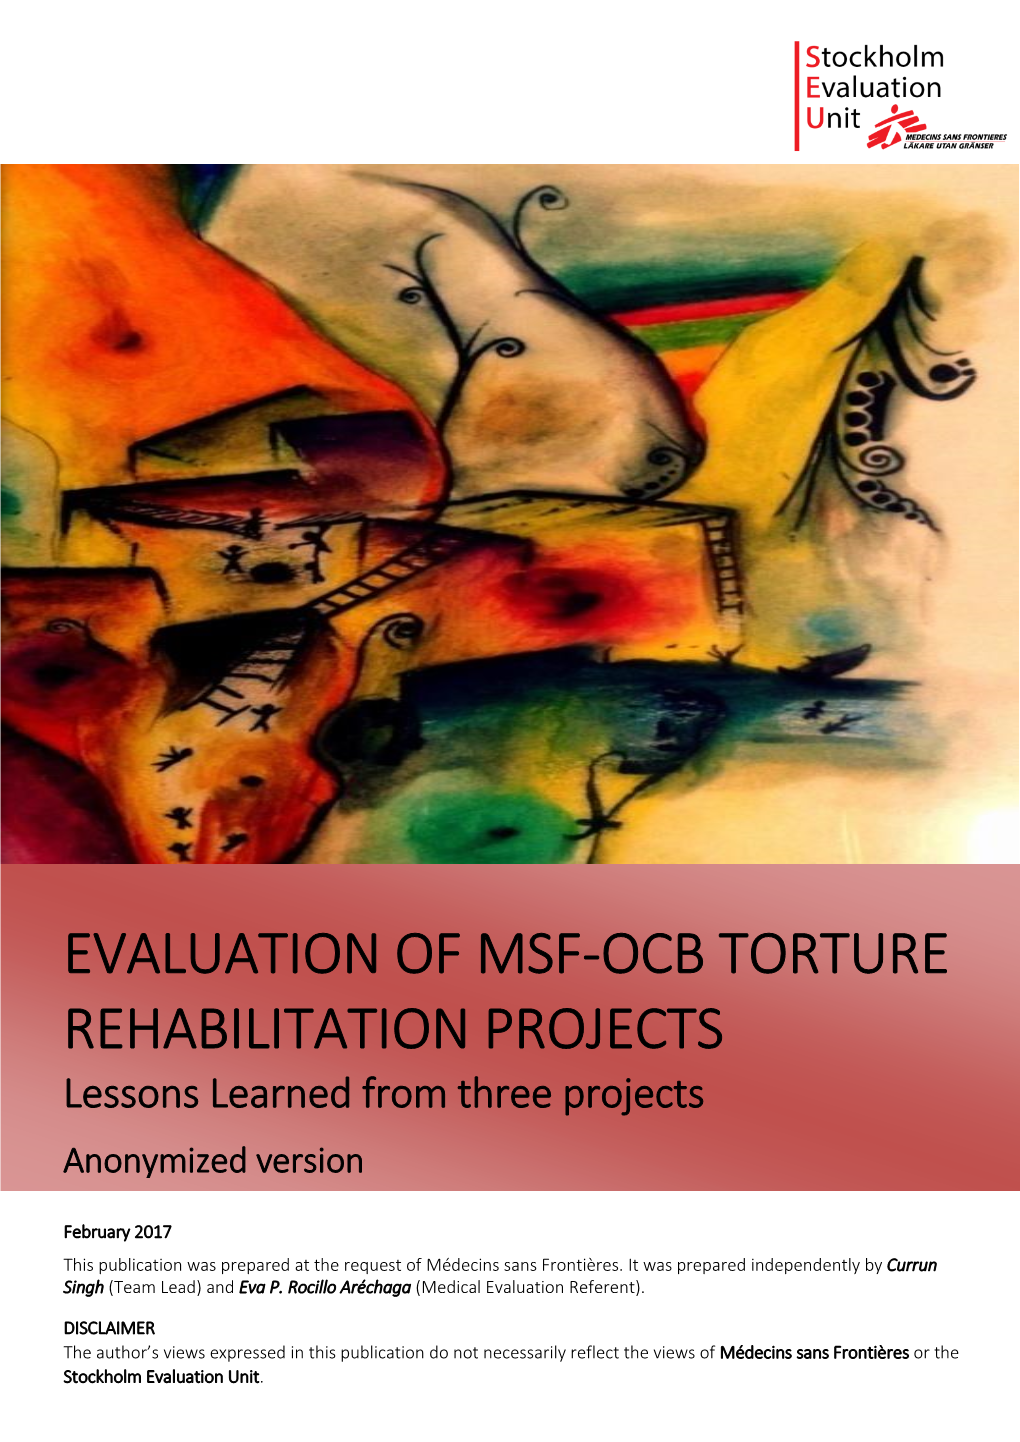 EVALUATION of MSF-OCB TORTURE REHABILITATION PROJECTS Lessons Learned from Three Projects Anonymized Version